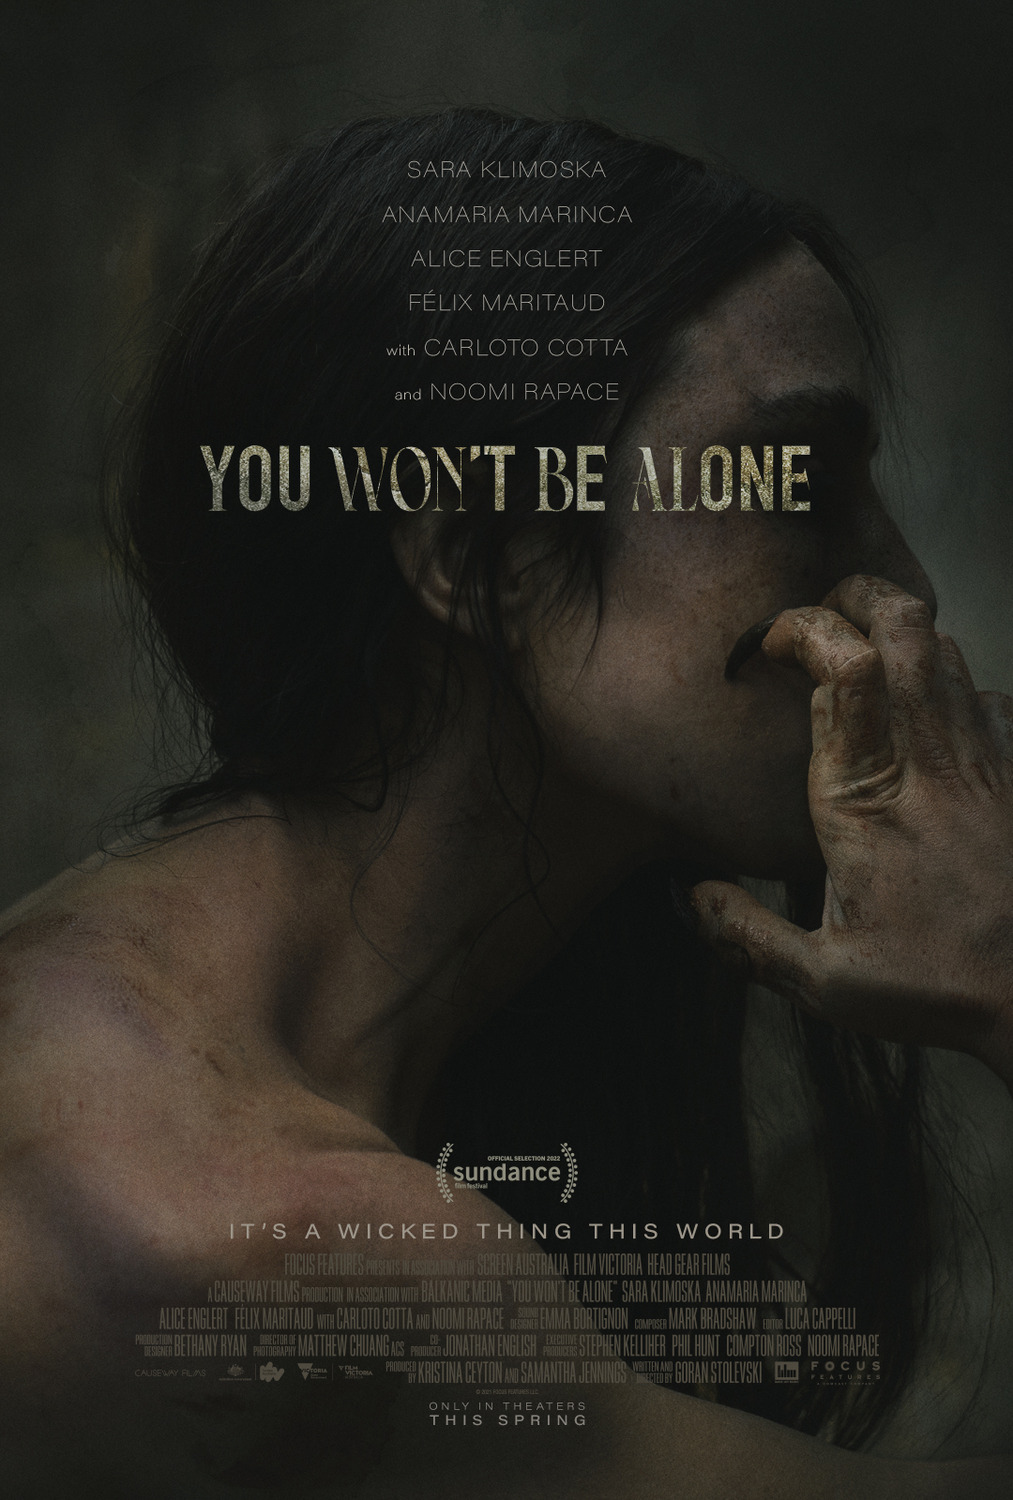 Alone With You (Movie Review) - Cryptic Rock